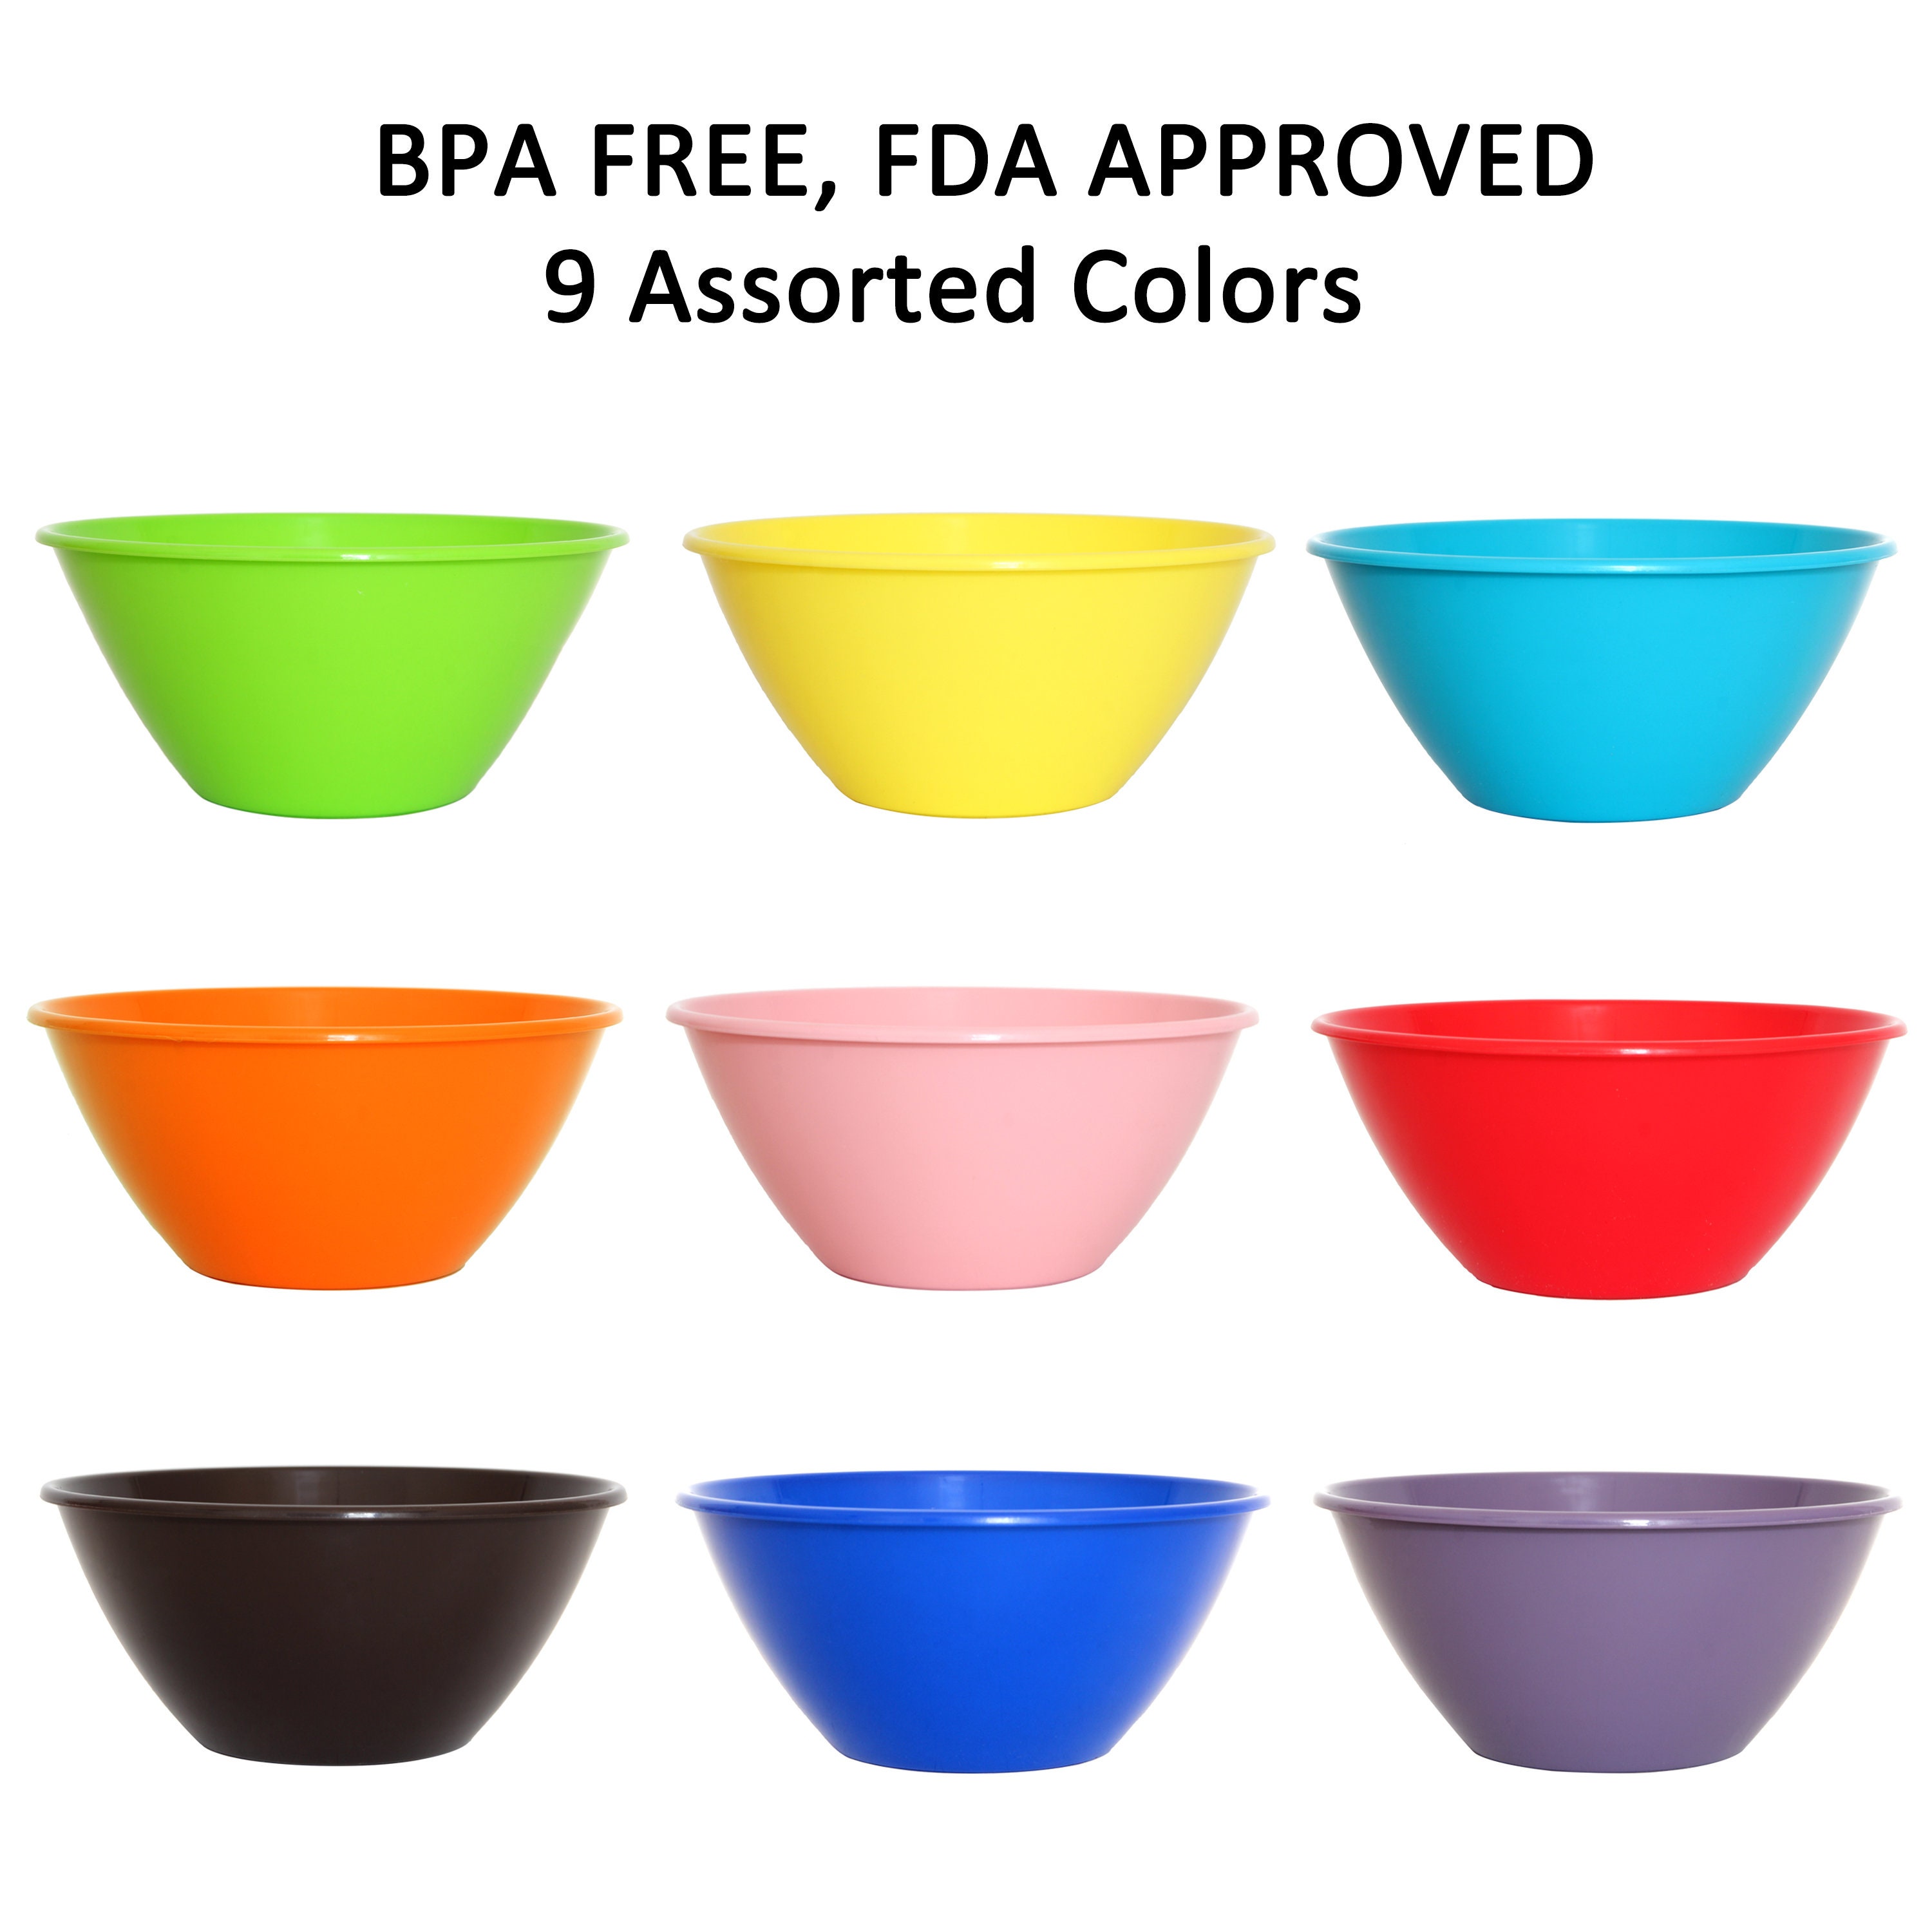 Youngever 22 Ounce Plastic Bowls with Lids, Cereal Bowls, Soup Bowls, Food  Storage Containers, Set of 9 in 9 Assorted Colors